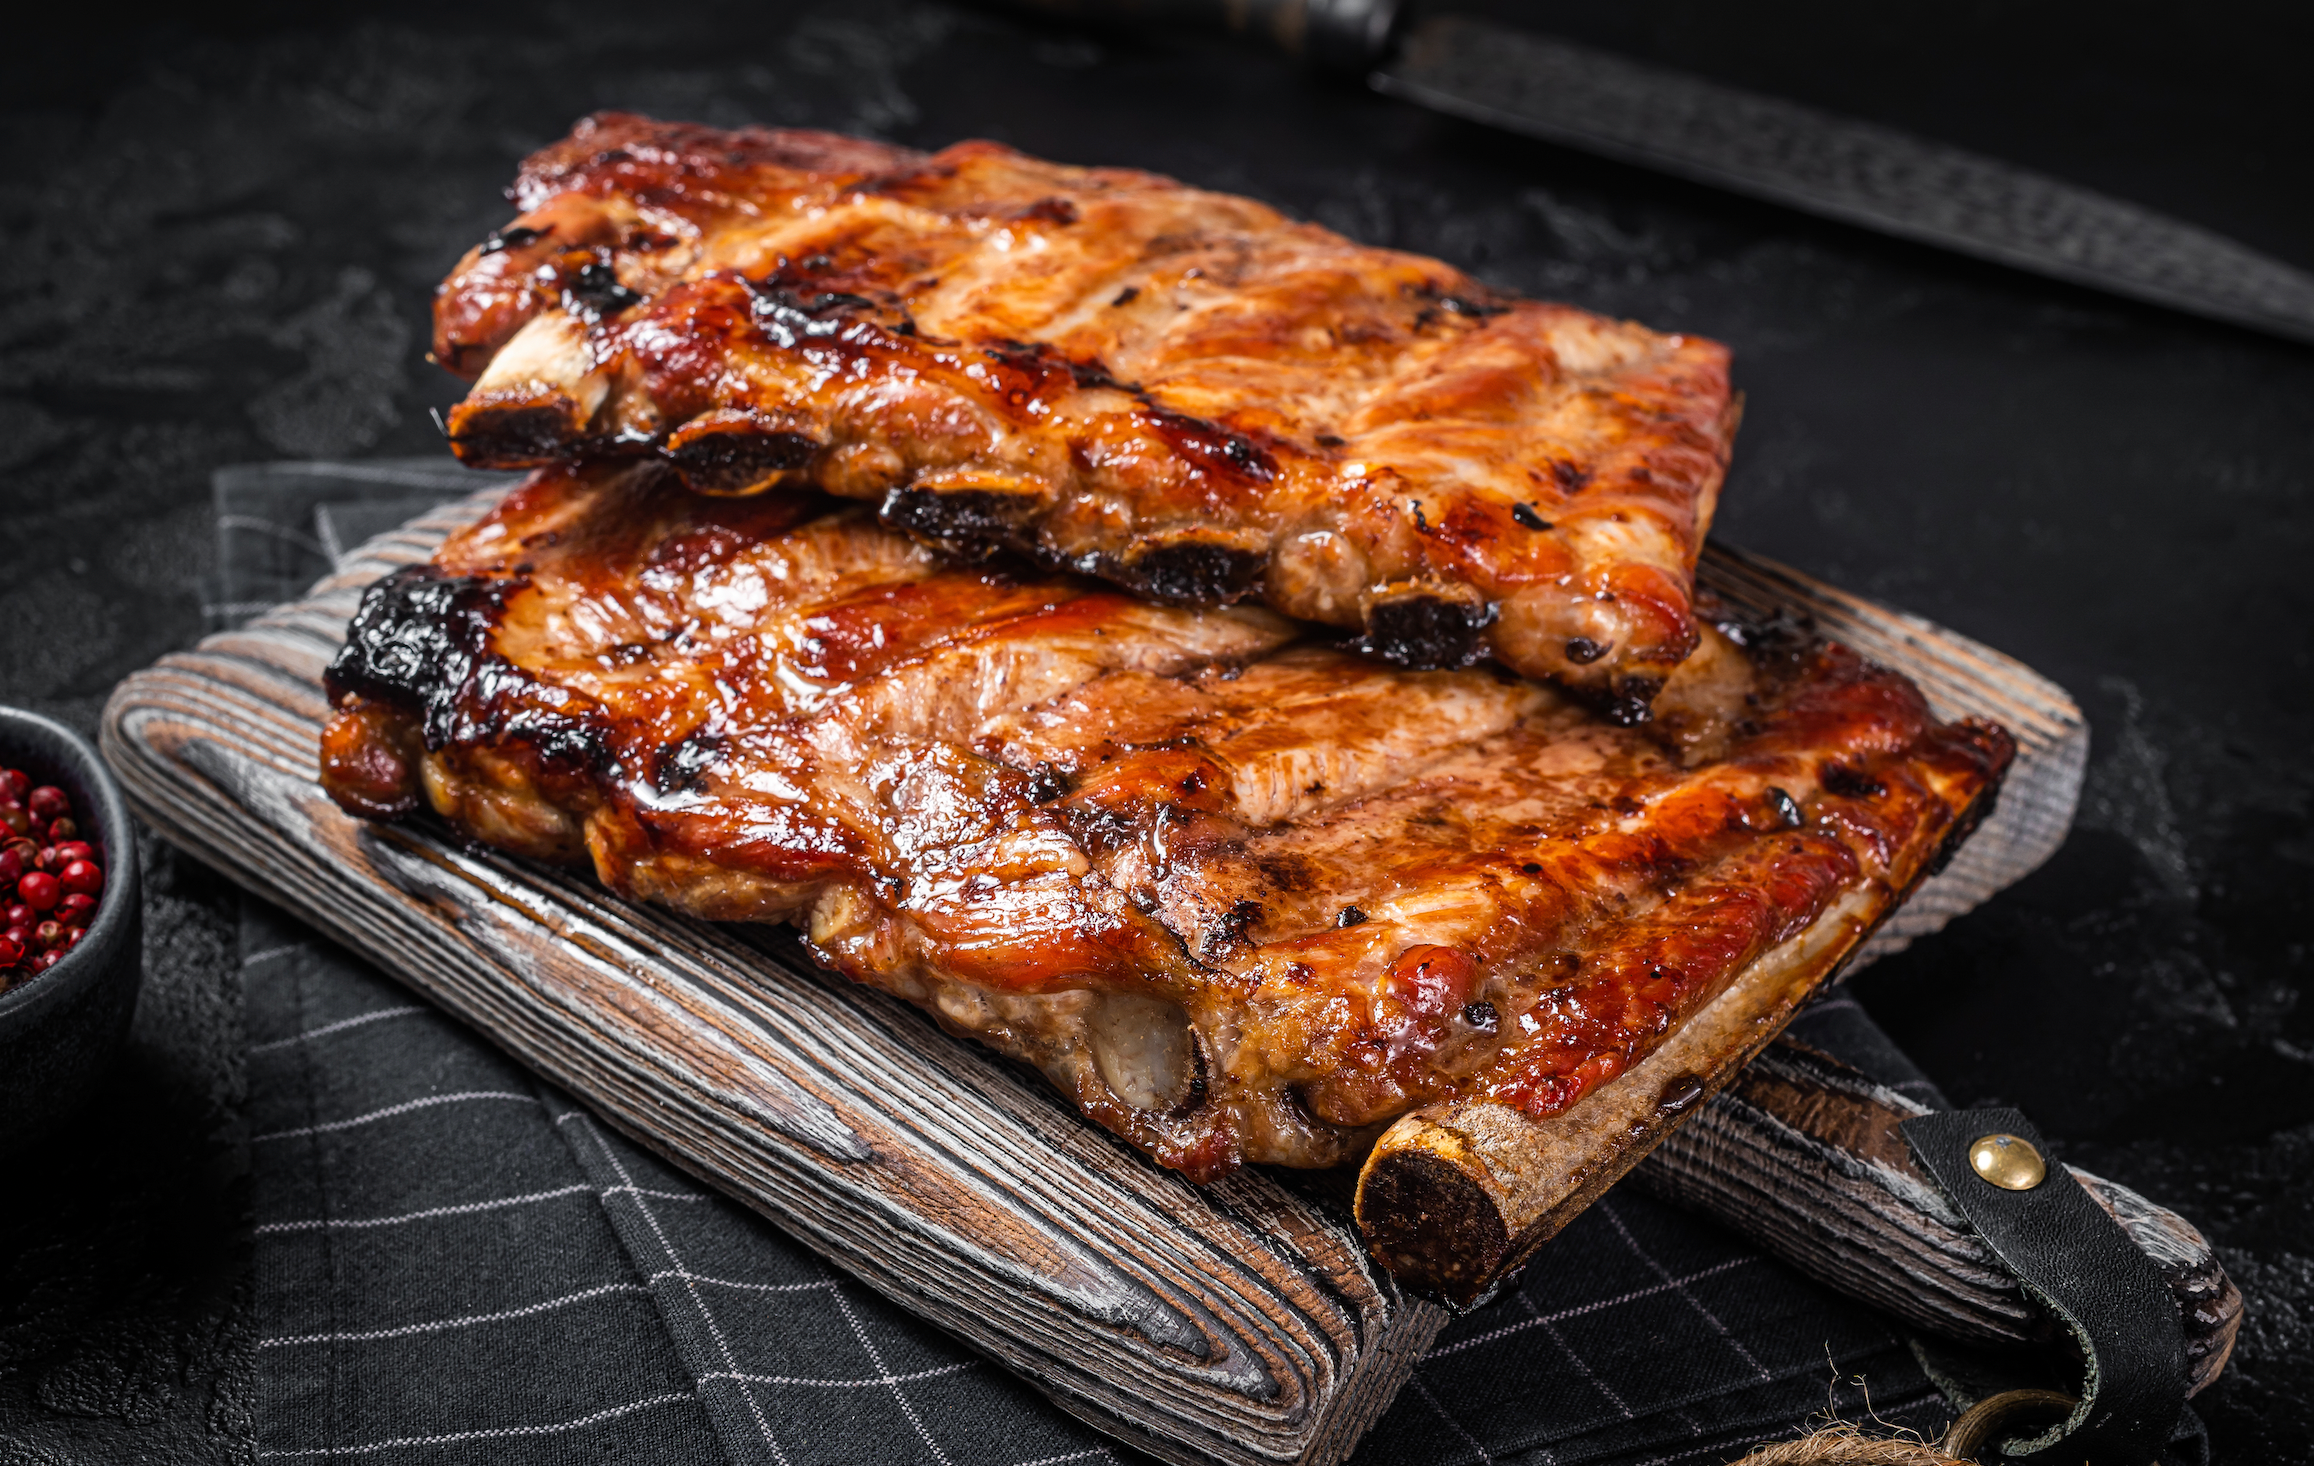 The perfect ribs